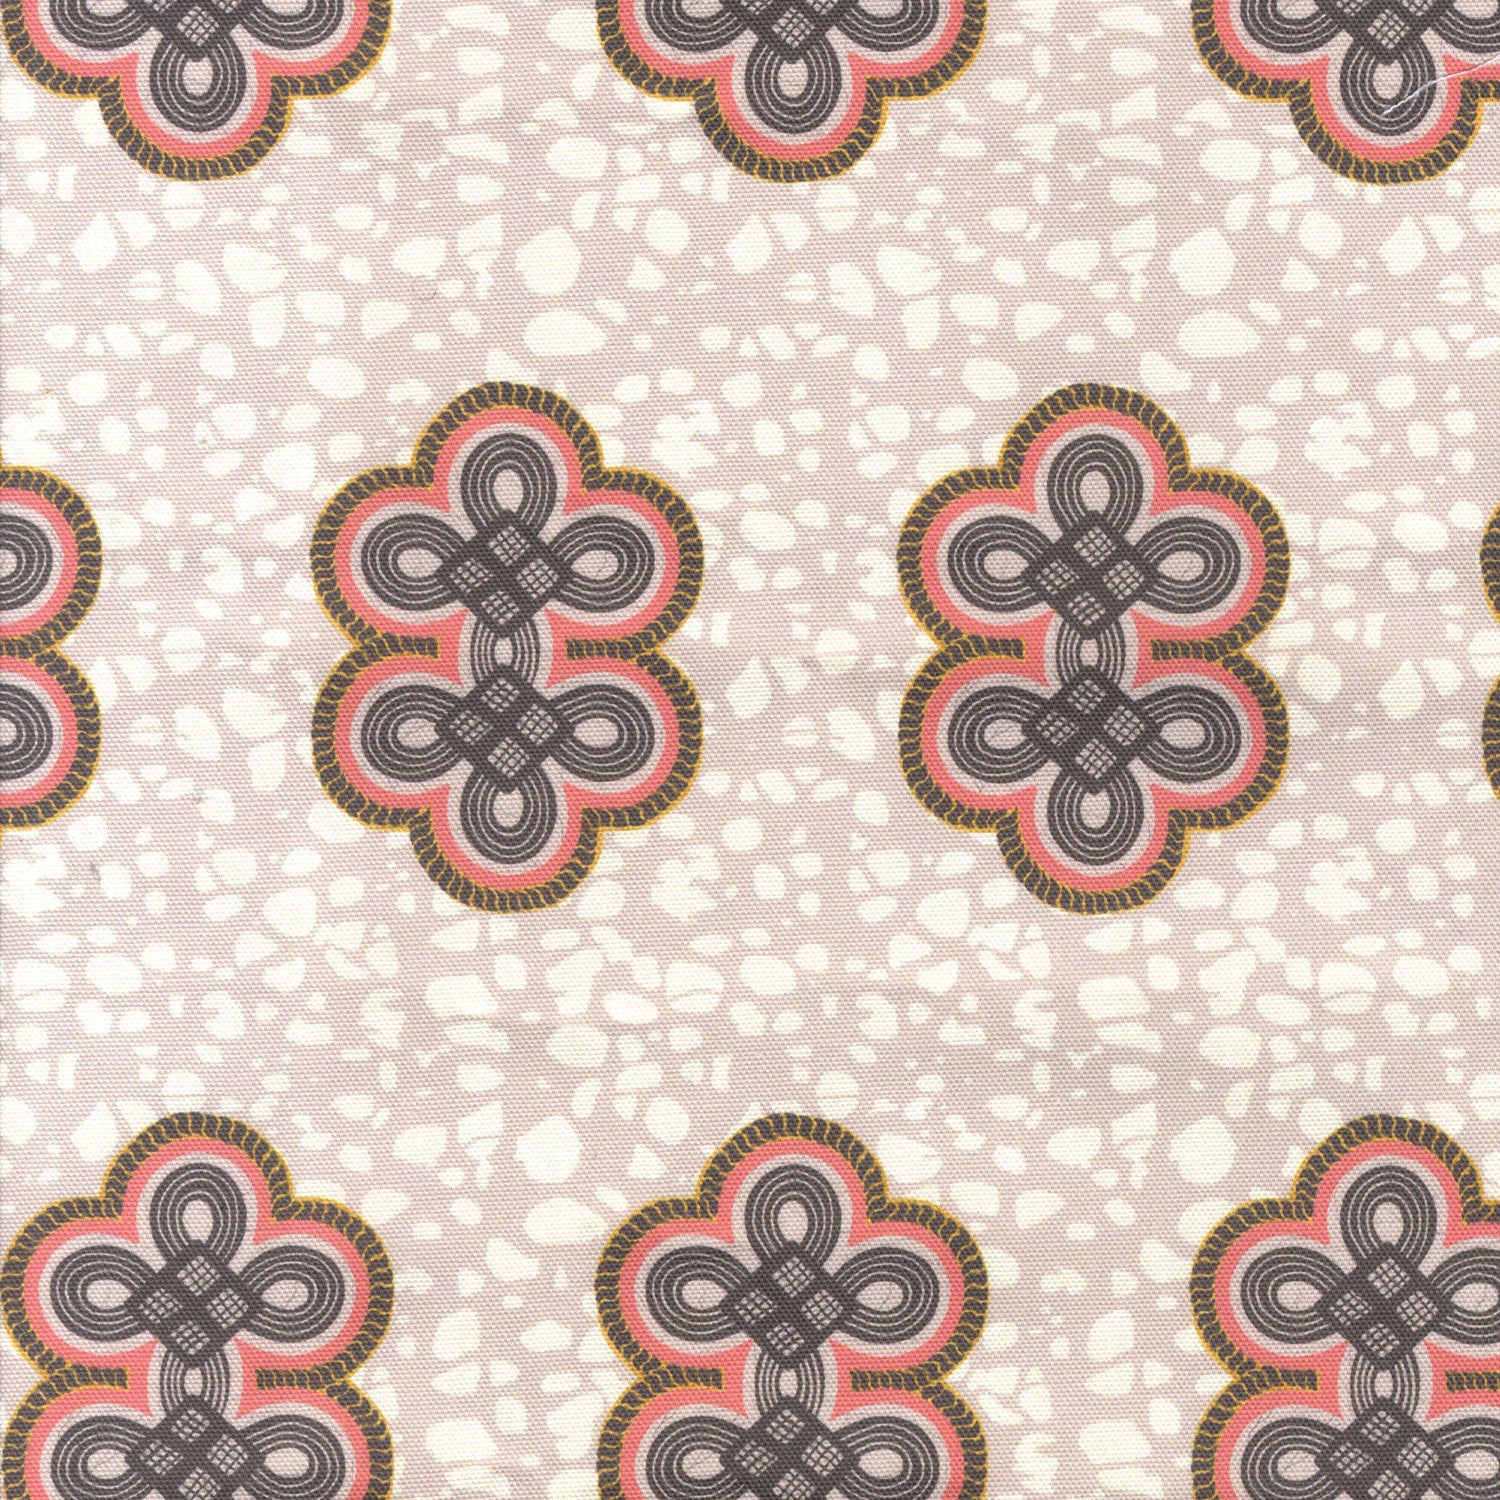 Detail of fabric in a repeating curvilinear knot print in coral and gray on a cream field.